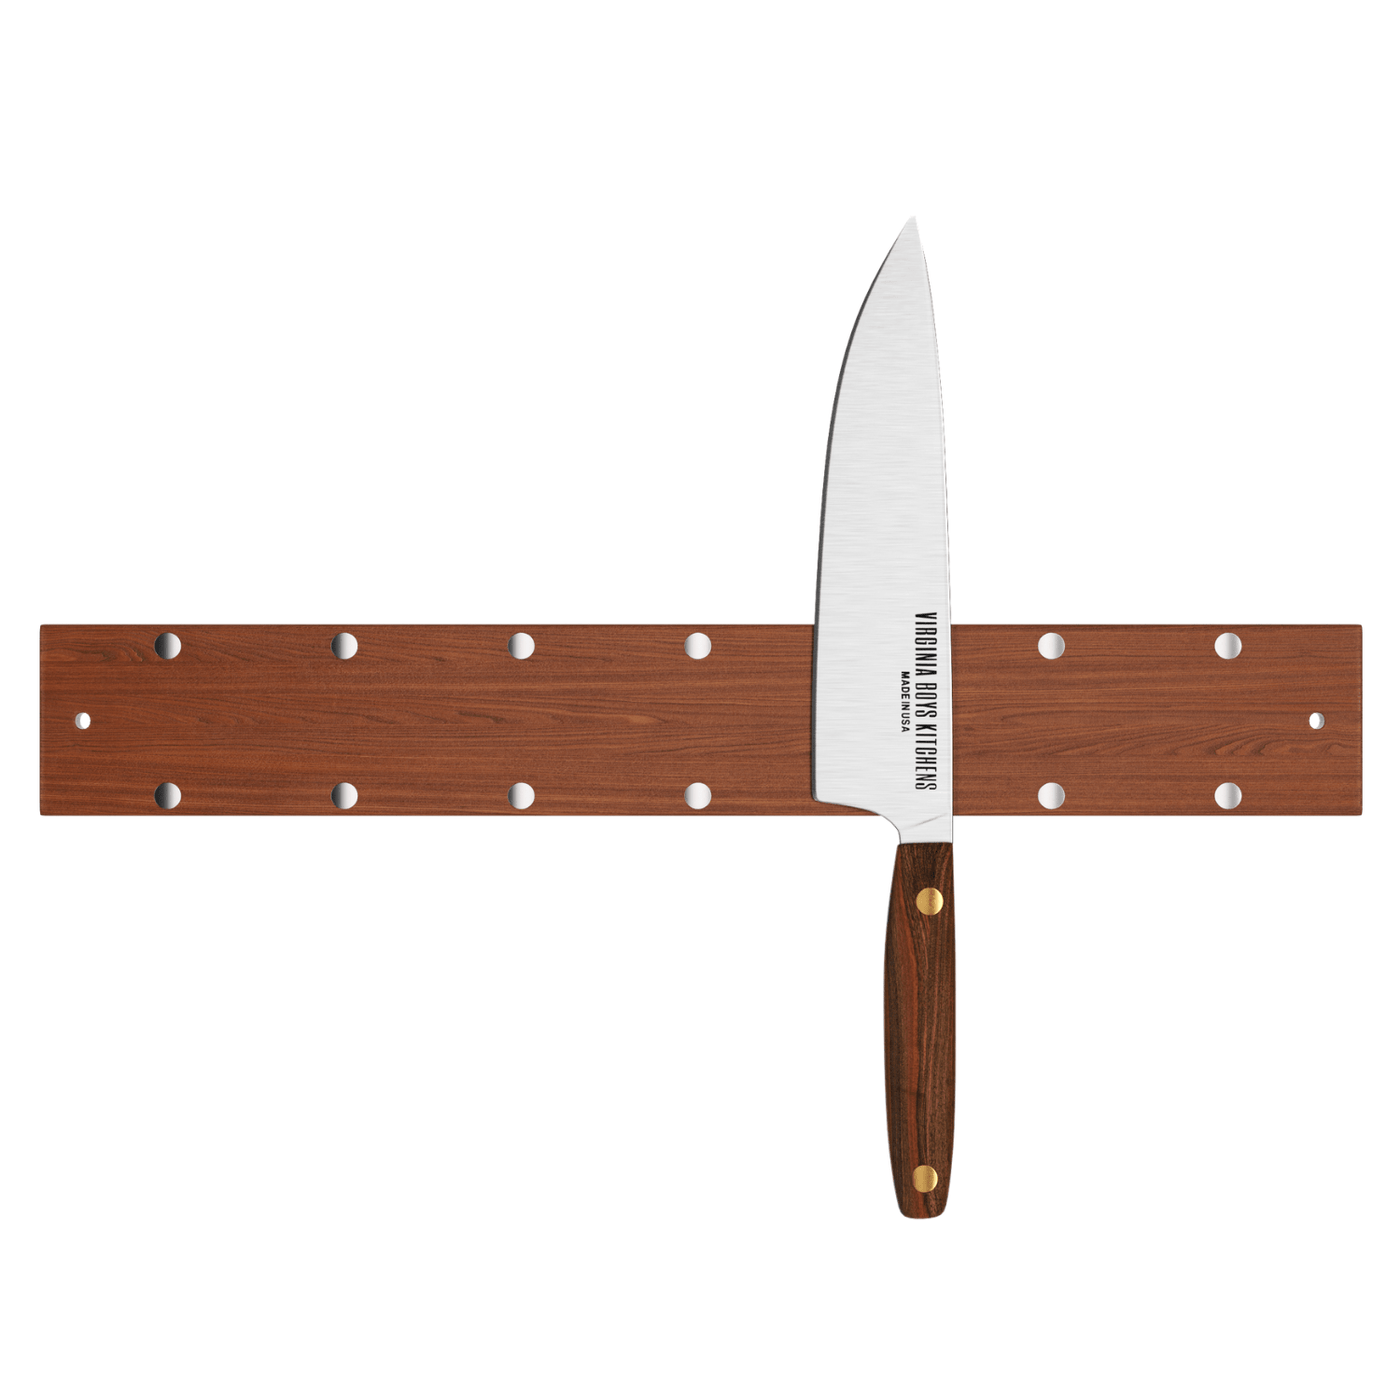 16" Wall Mounted Magnetic Walnut Wood Knife Rack - Holds 7 Knives by Virginia Boys Kitchens